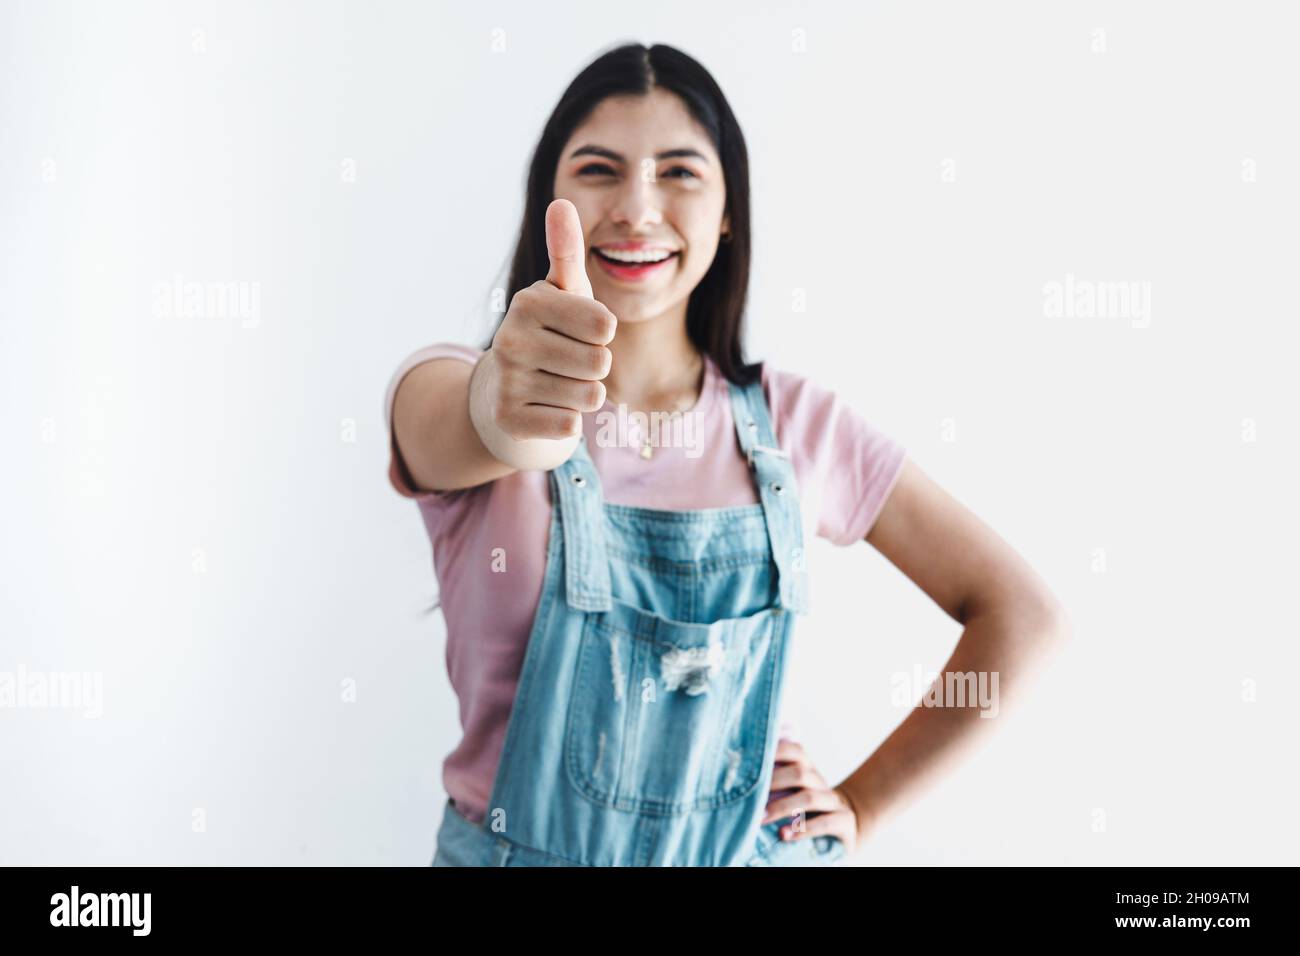 young latin woman smiling and showing thumbs up on a white background in Latin America Stock Photo